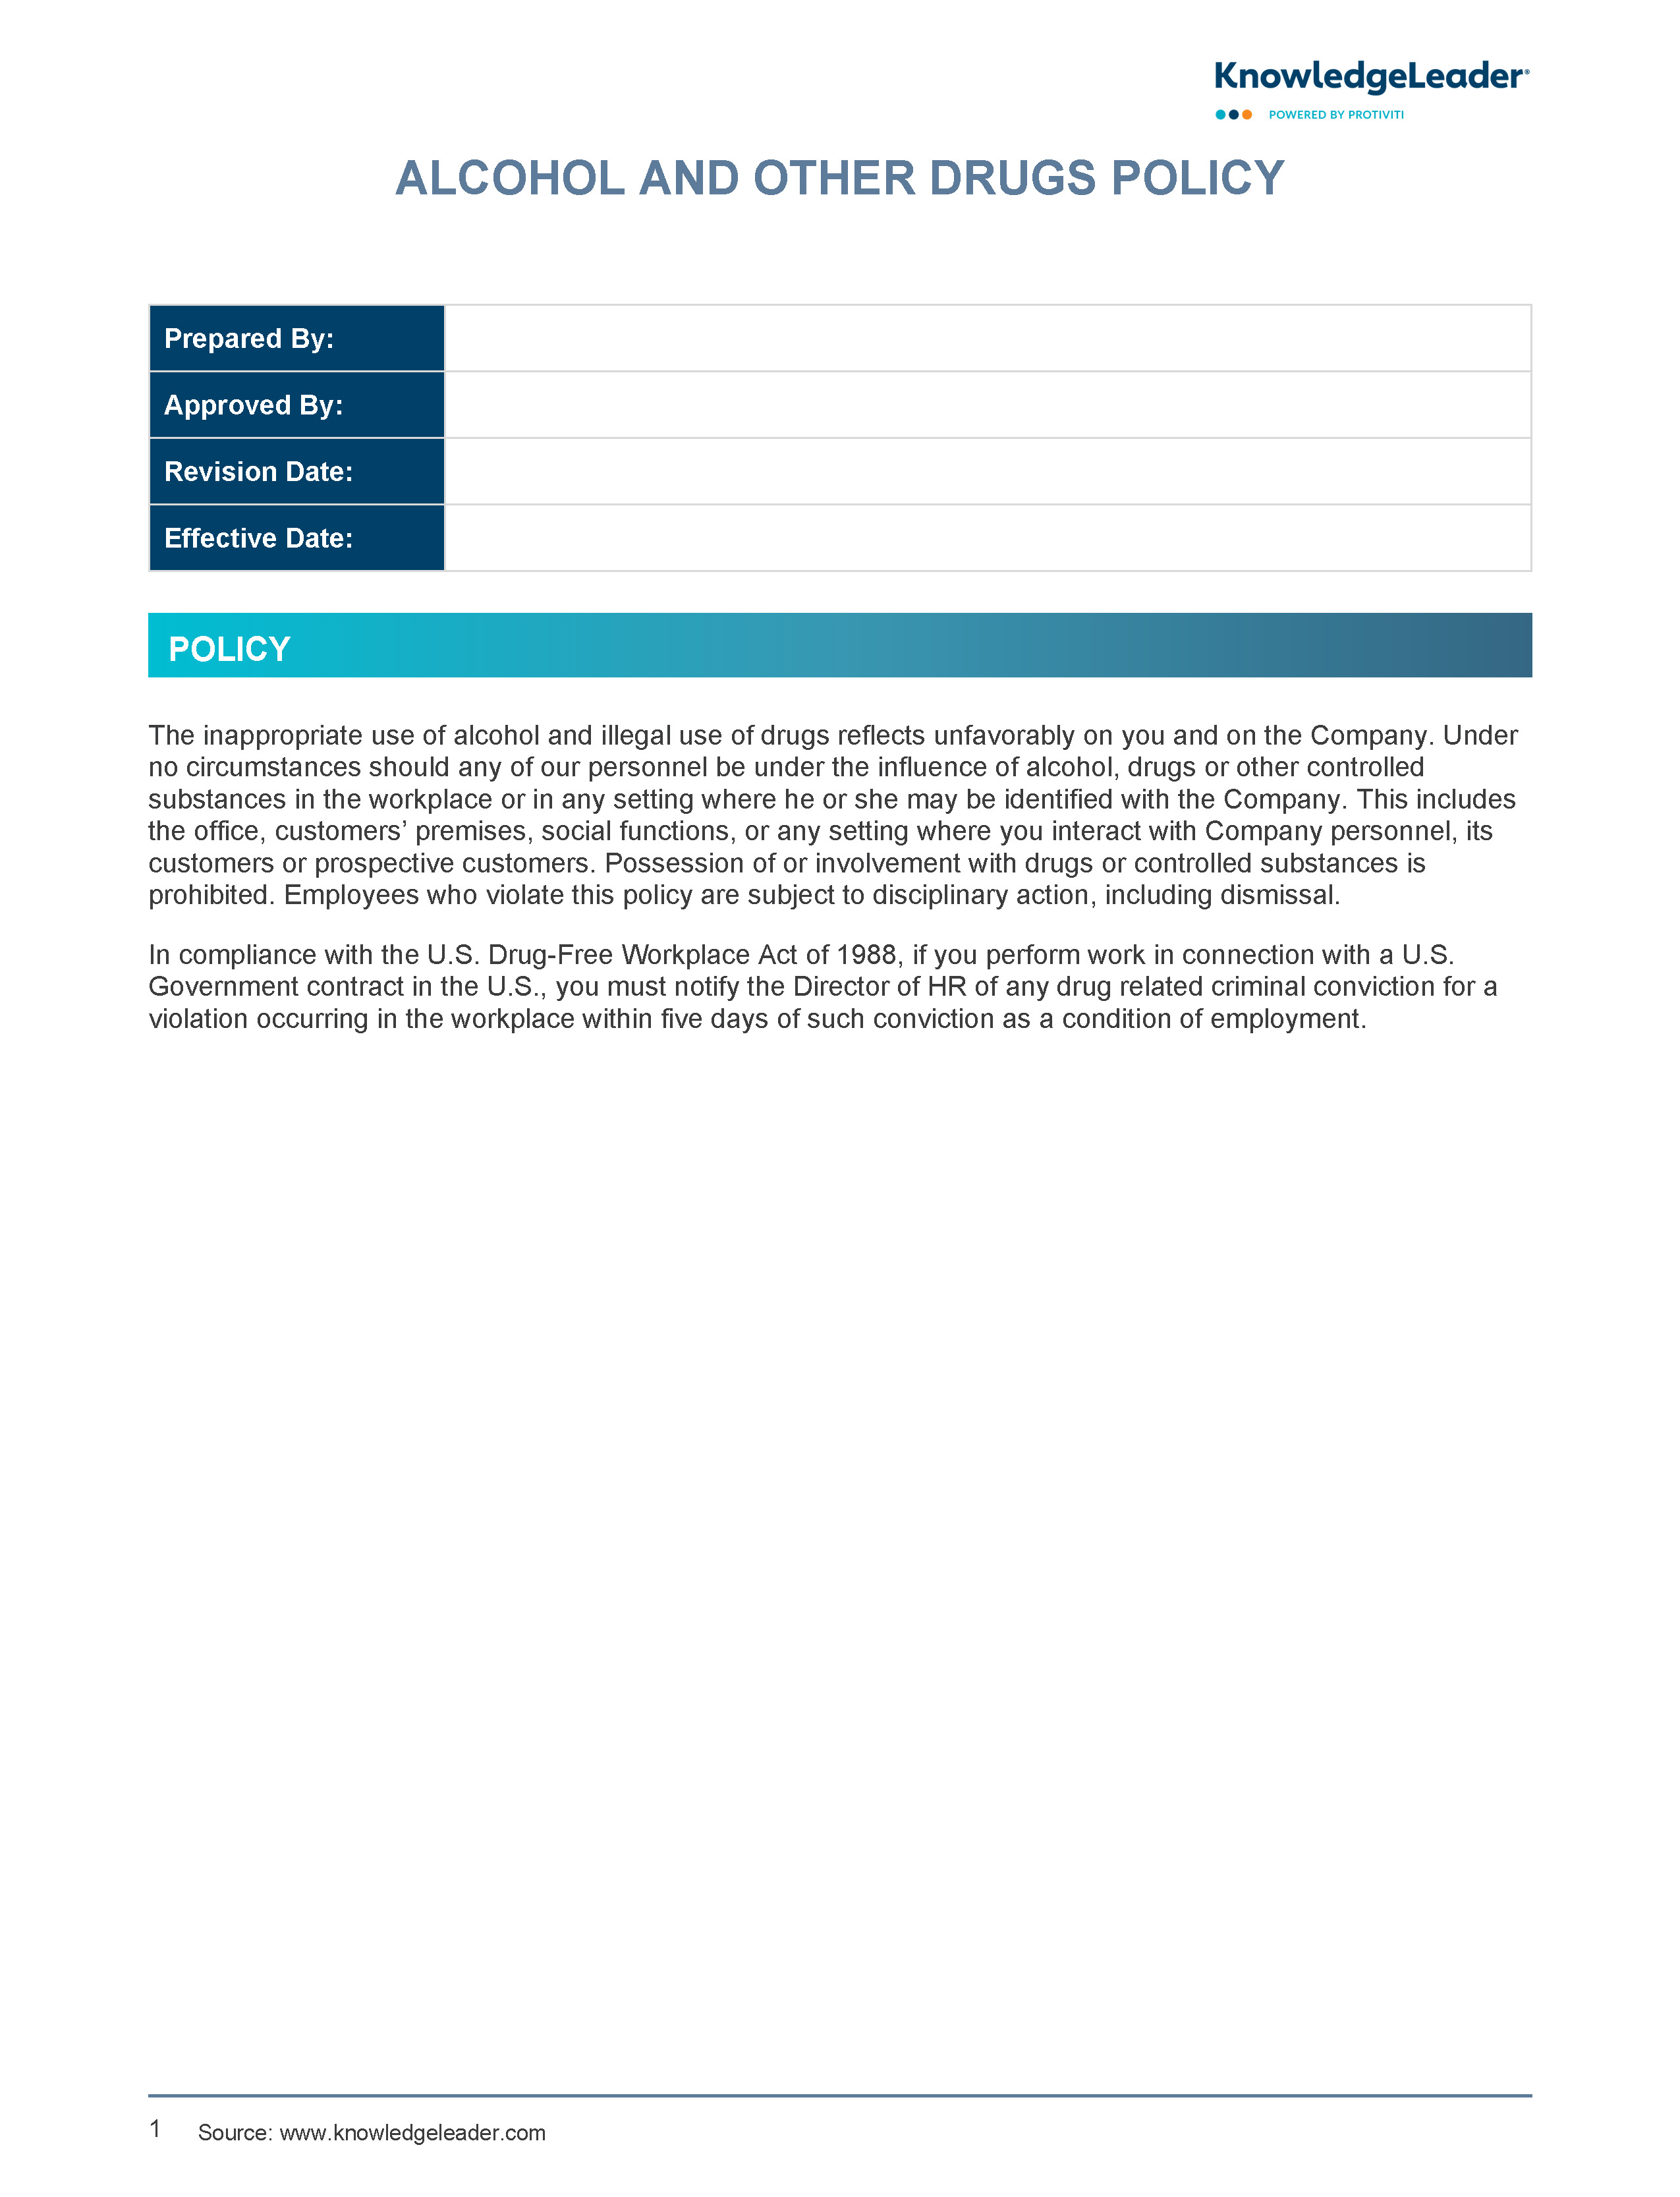 Screenshot of the first page of Alcohol and Other Drugs Policy